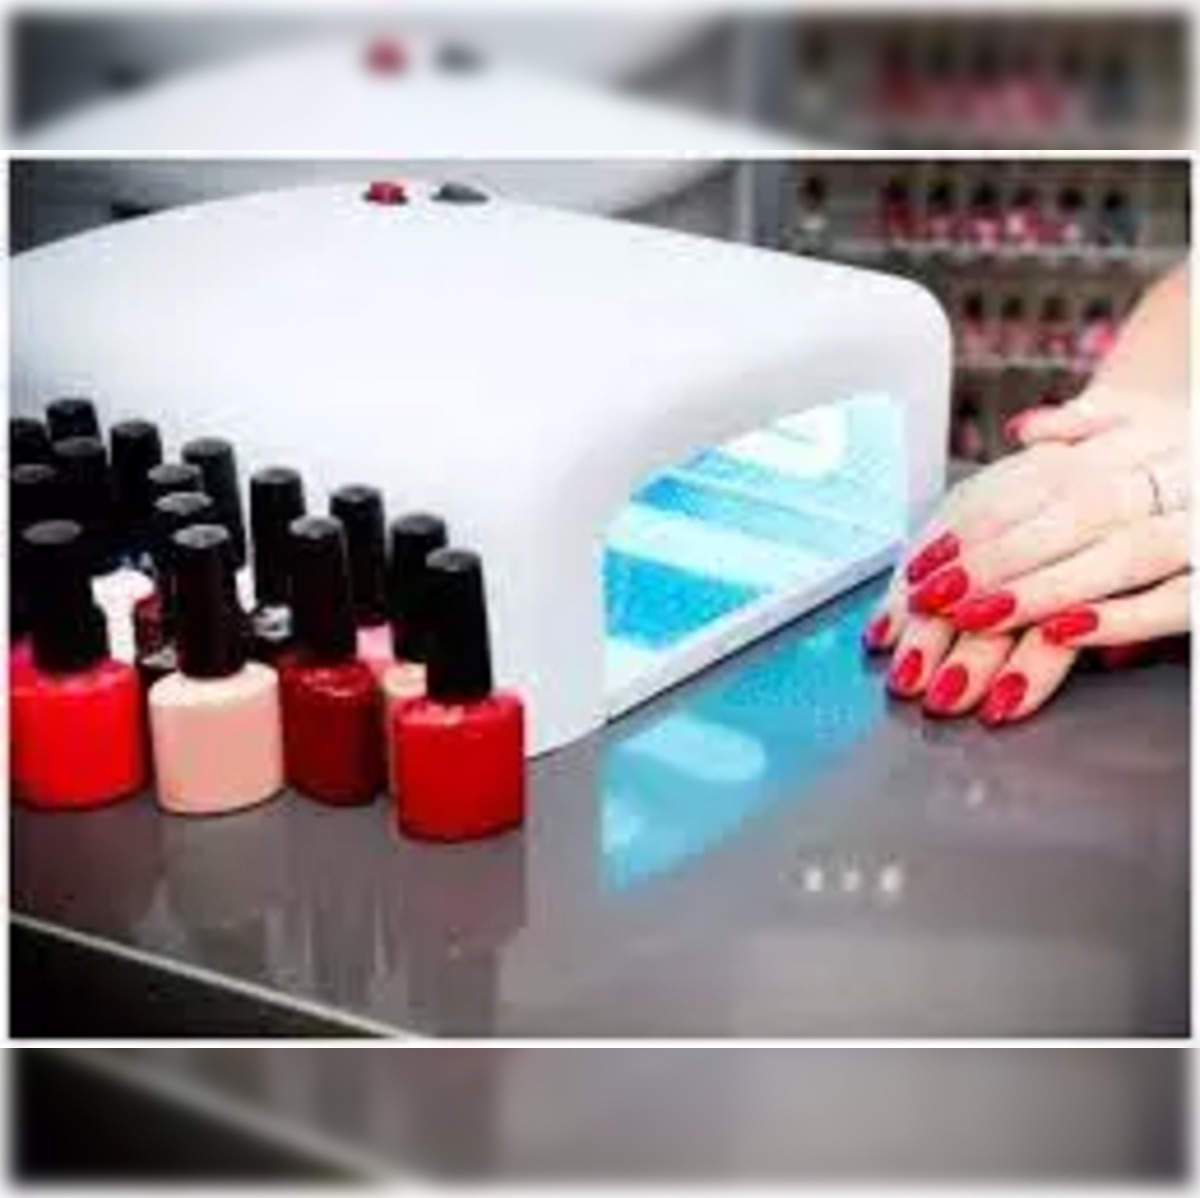 Top Nail Studio For Women services in Hyderabad, India at your home